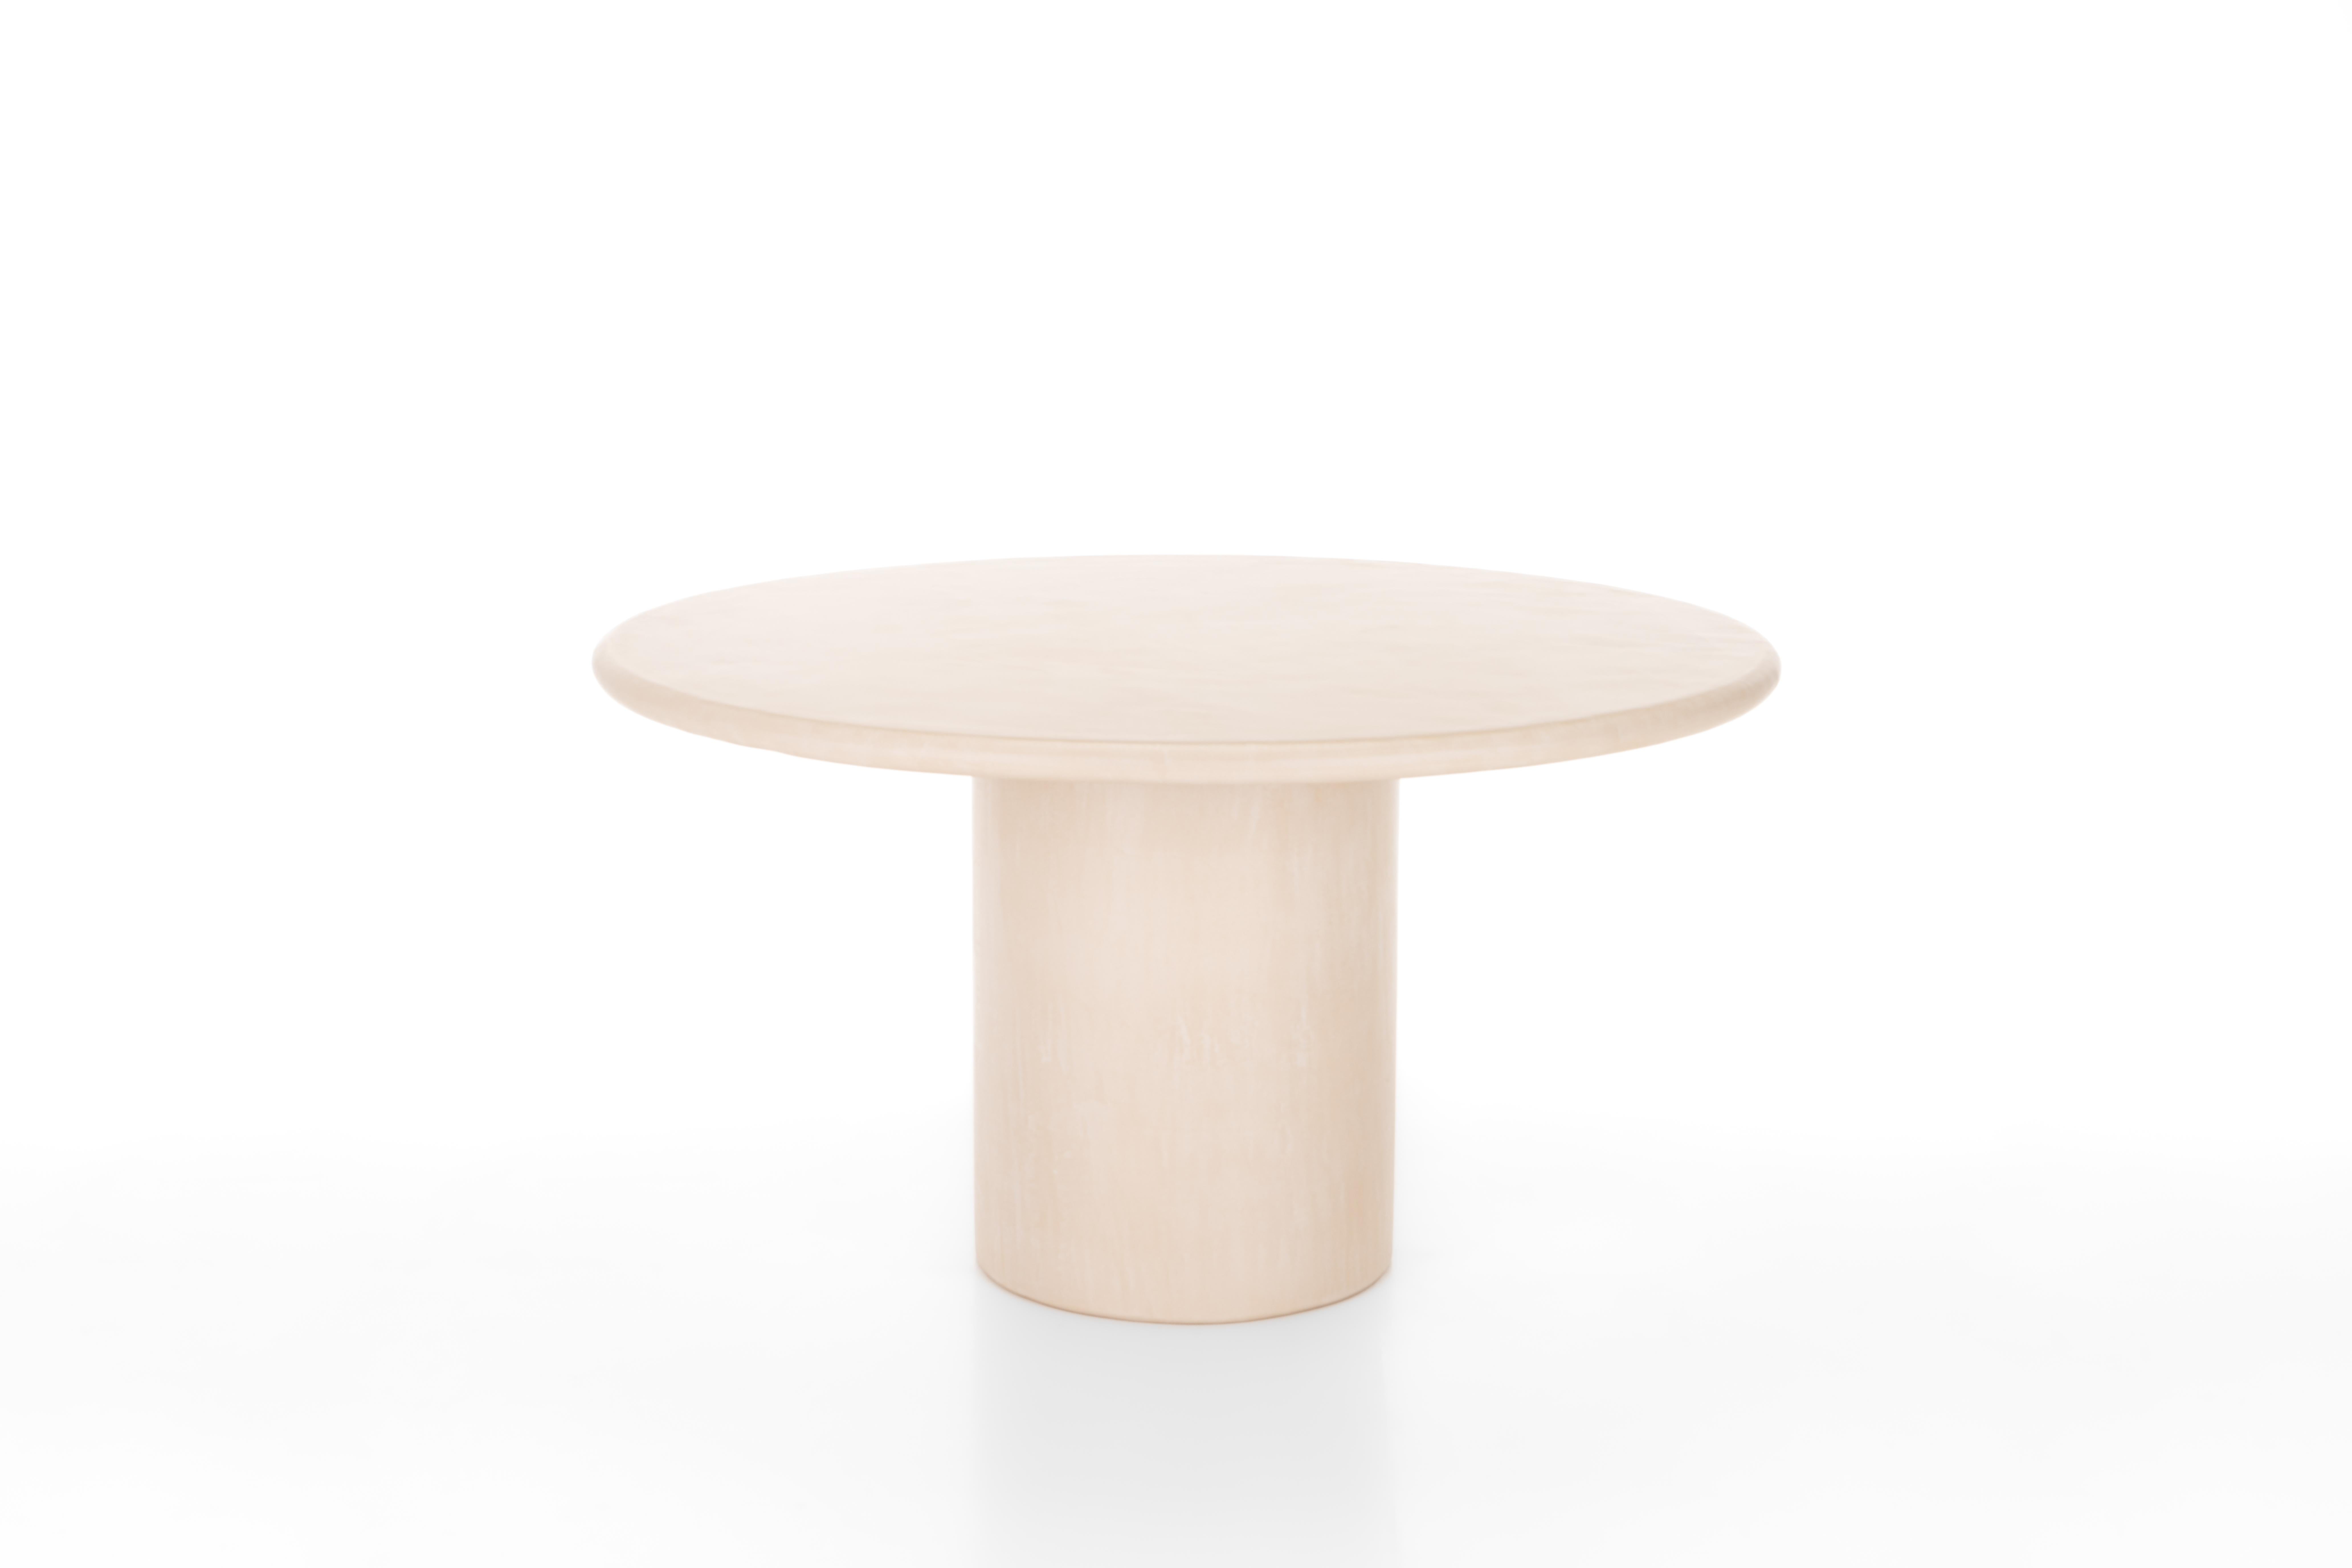 Contemporary Belgian design, handmade natural plaster table with a textured and earthy character.

Indoor use (price outdoor +10%)

Latin adjective “columna” /koˈlum. na/: column, pillar

The Column dining table is handcrafted with multiple layers